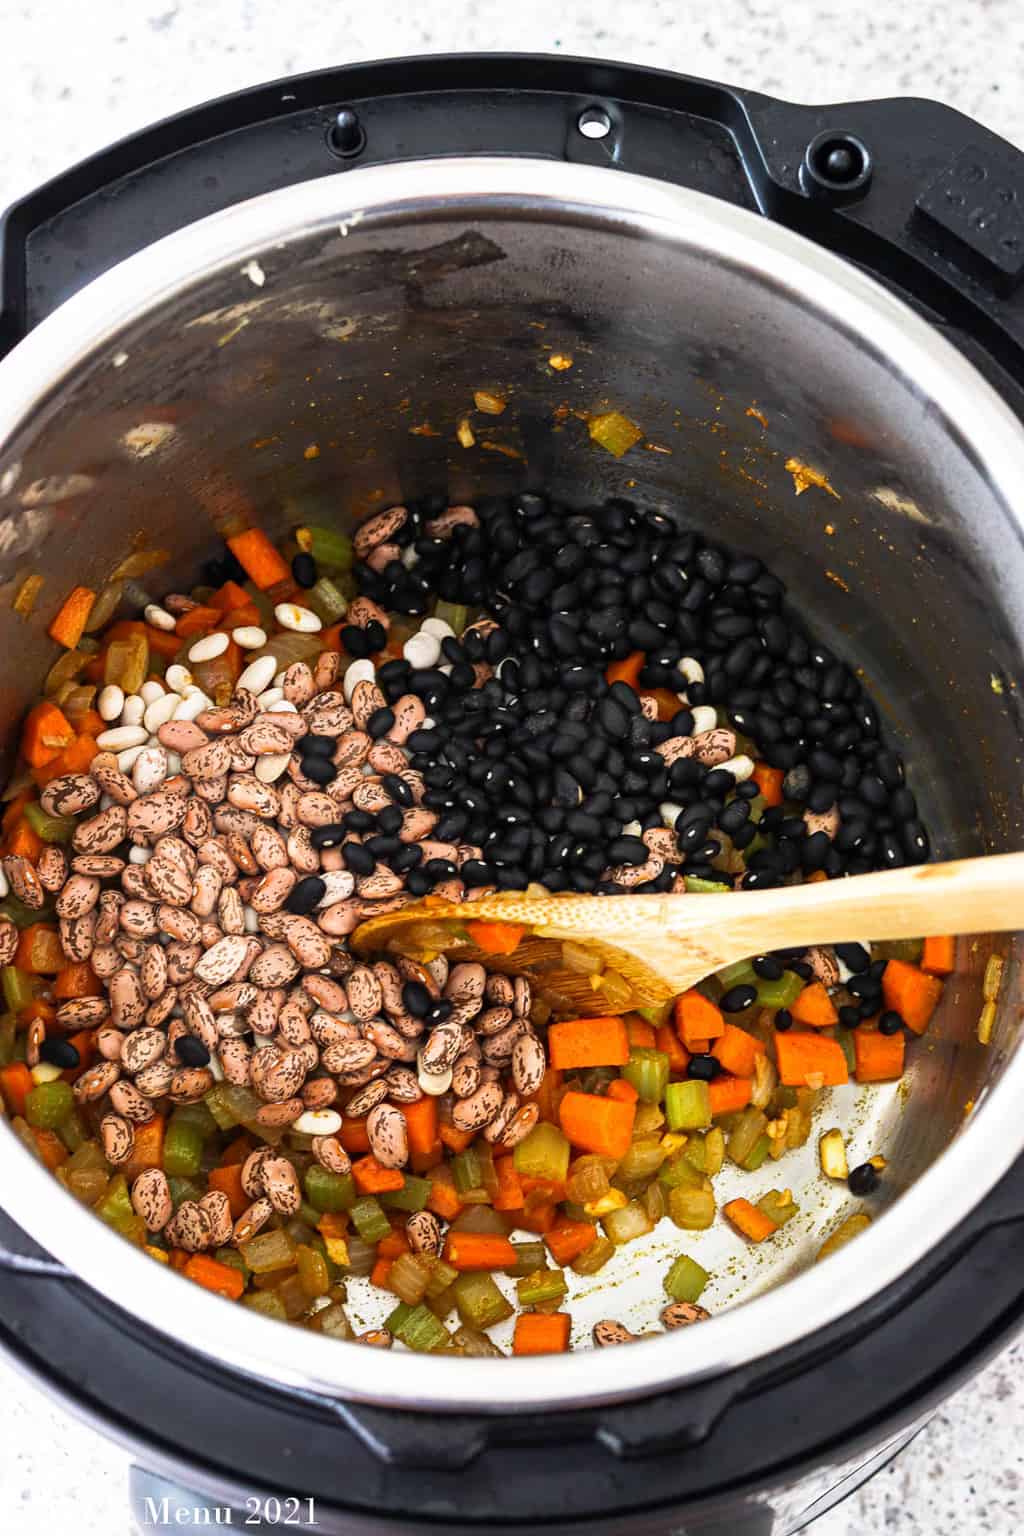 An overhead shot of am Instant pot with sauteed veggies and dried beans